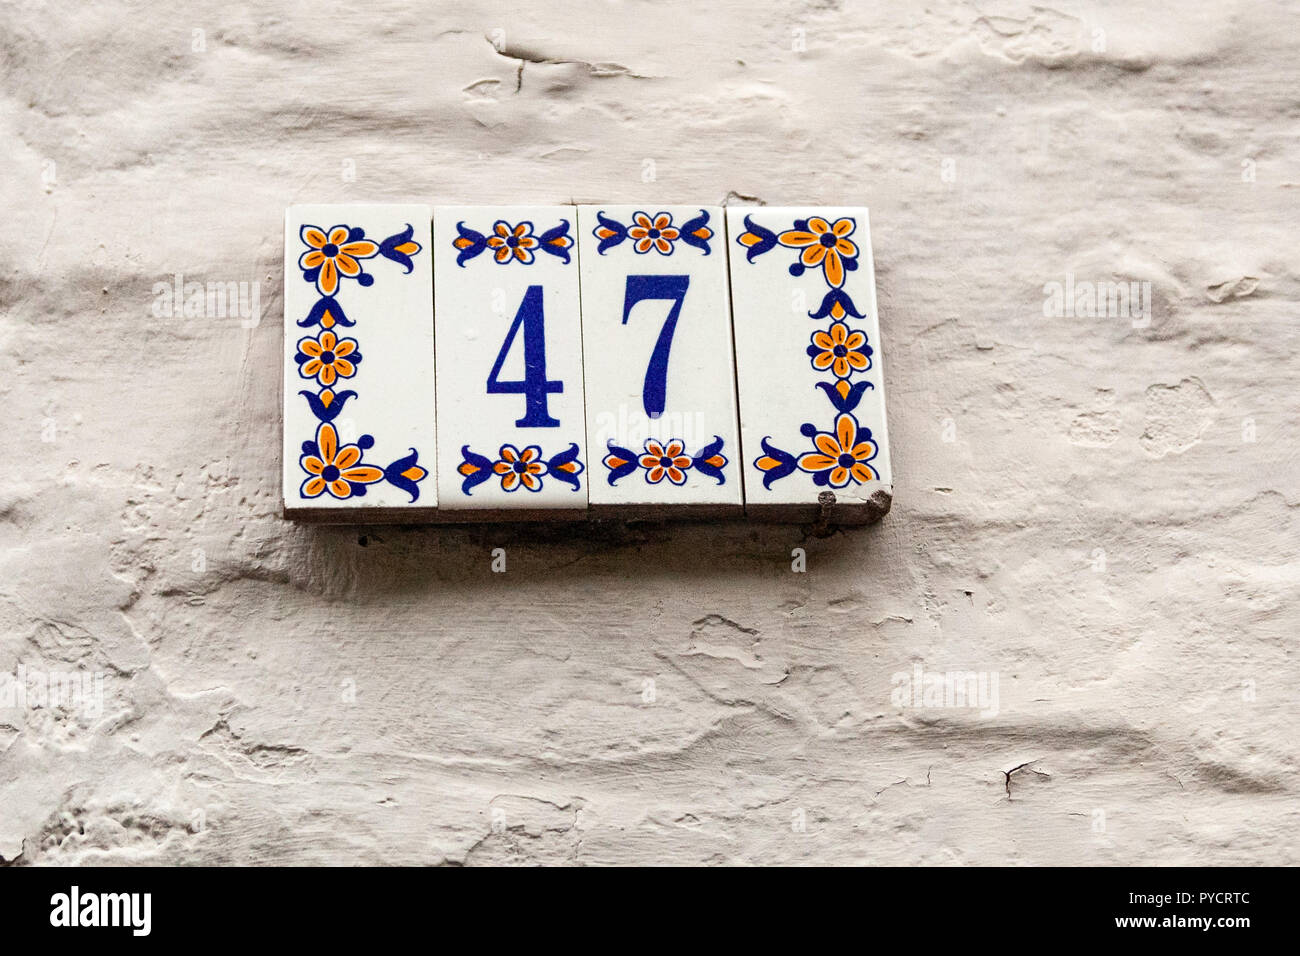 House number forty-seven 47 painted on ceramic tile in blue and yellow, red and gold from Sweden Stock Photo